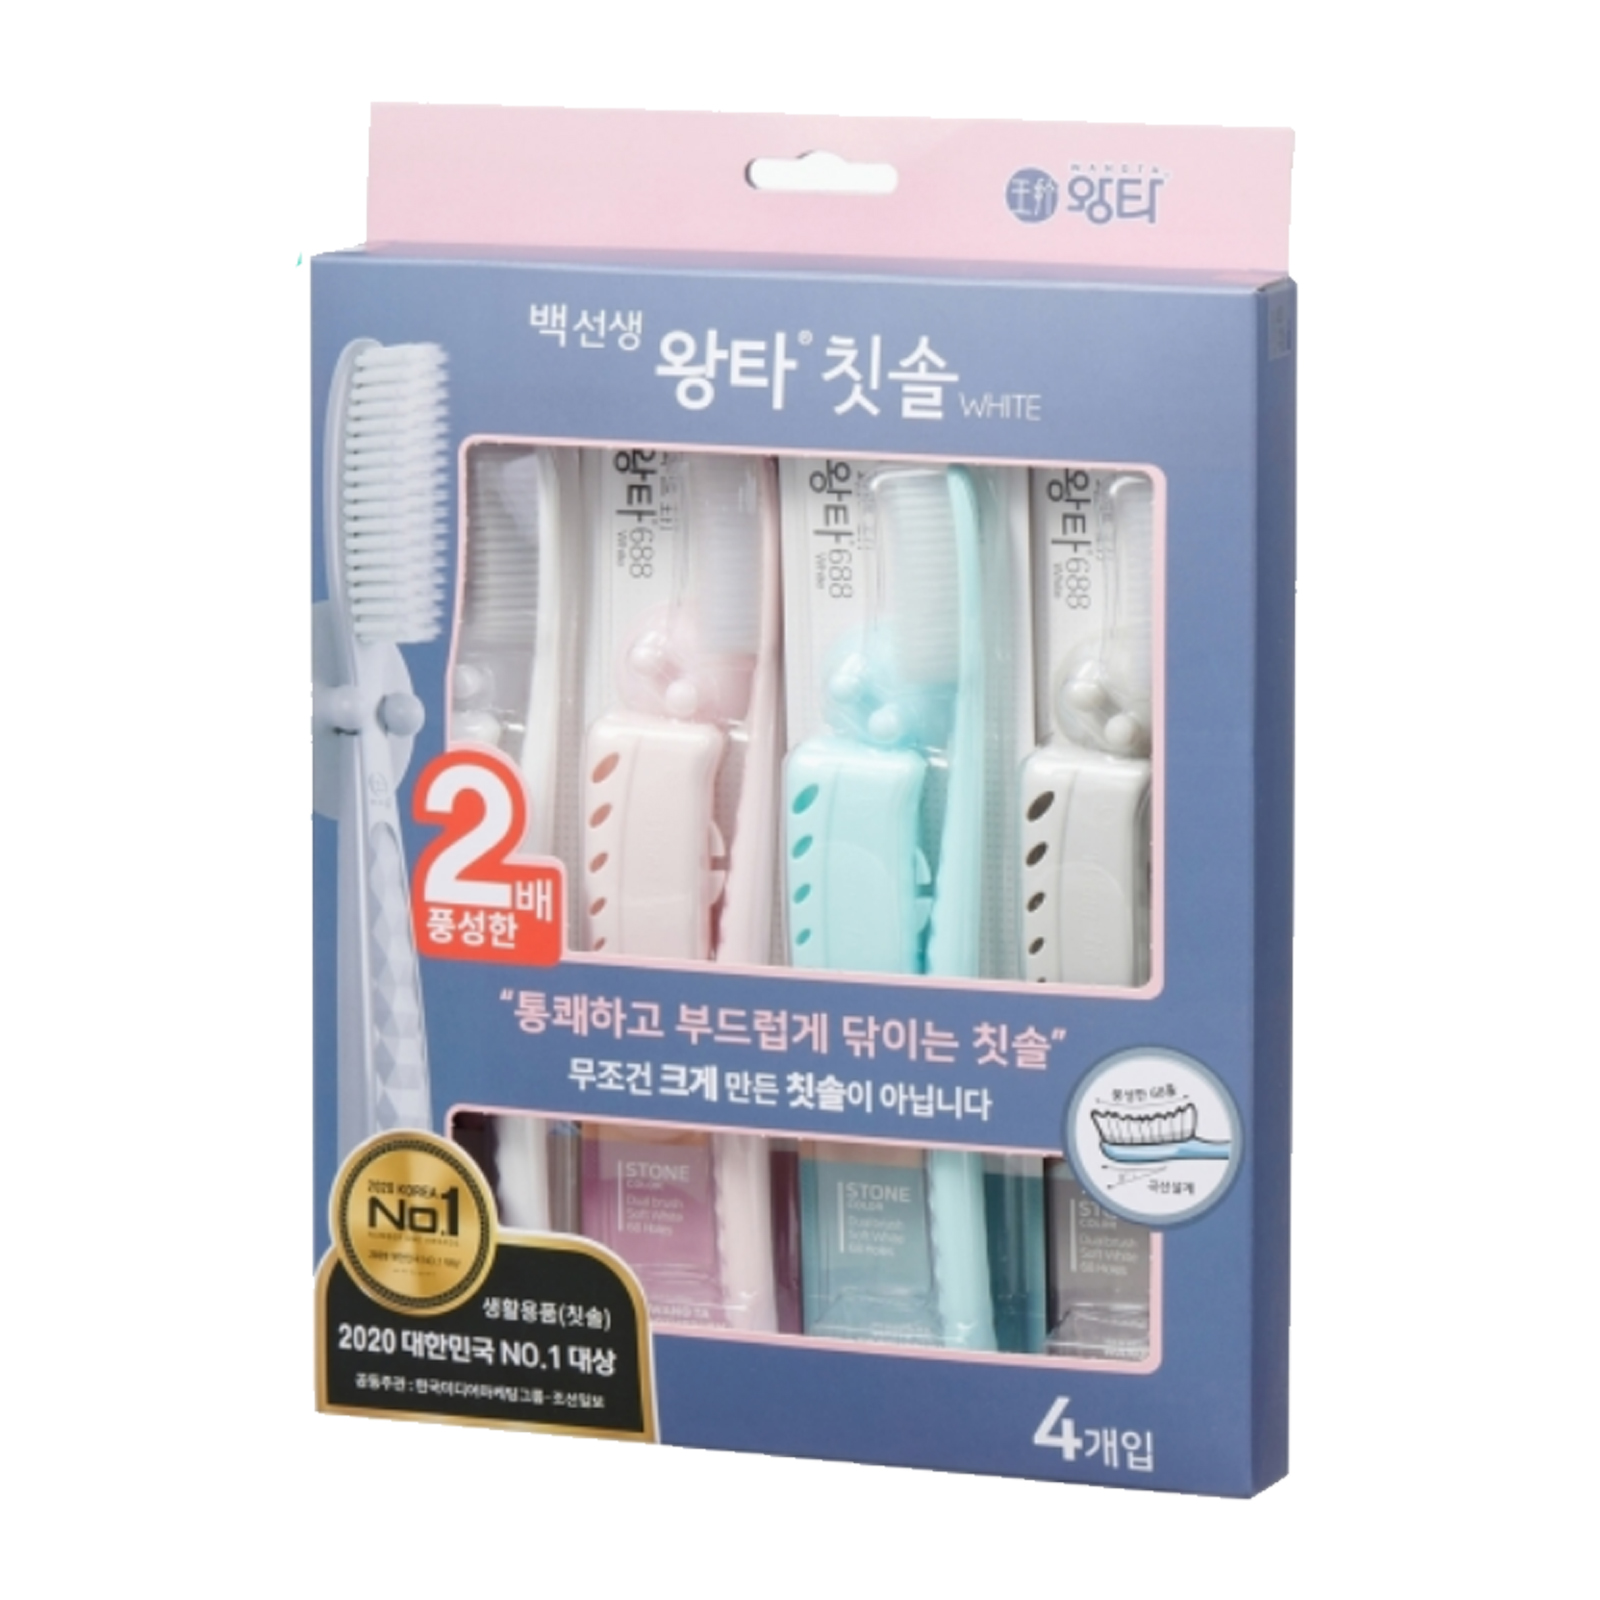 Wangta Giant Soft Toothbrushes Pack of 4pcs - Now In Seoul